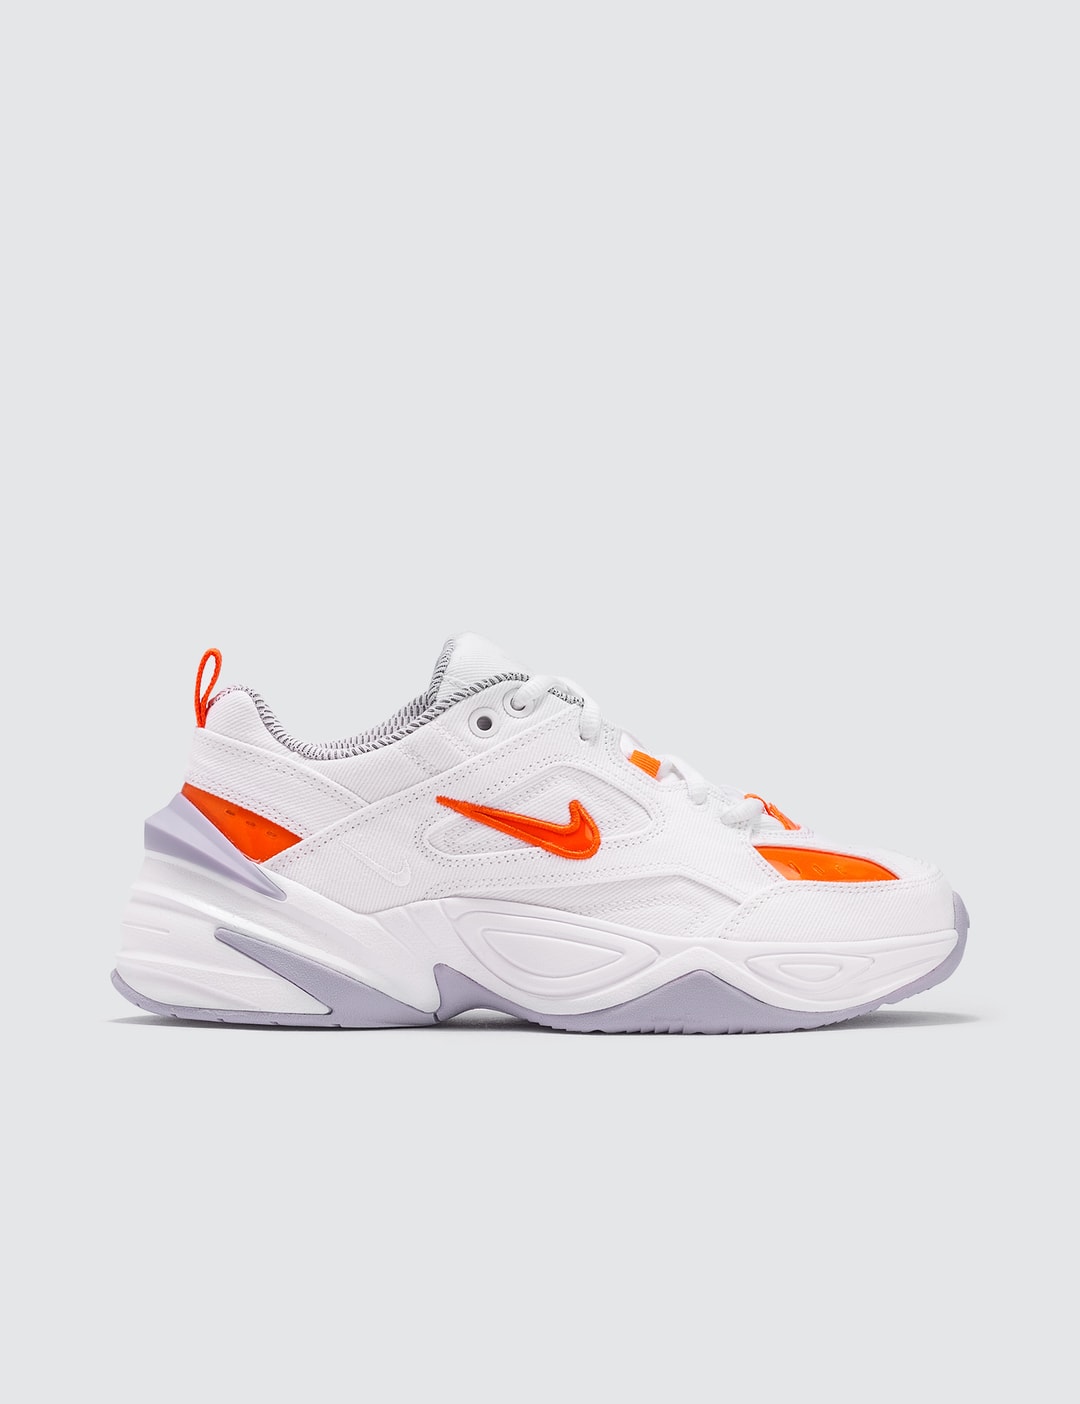 Gángster comprador Lanzamiento Nike - W Nike M2k Tekno LX | HBX - Globally Curated Fashion and Lifestyle  by Hypebeast